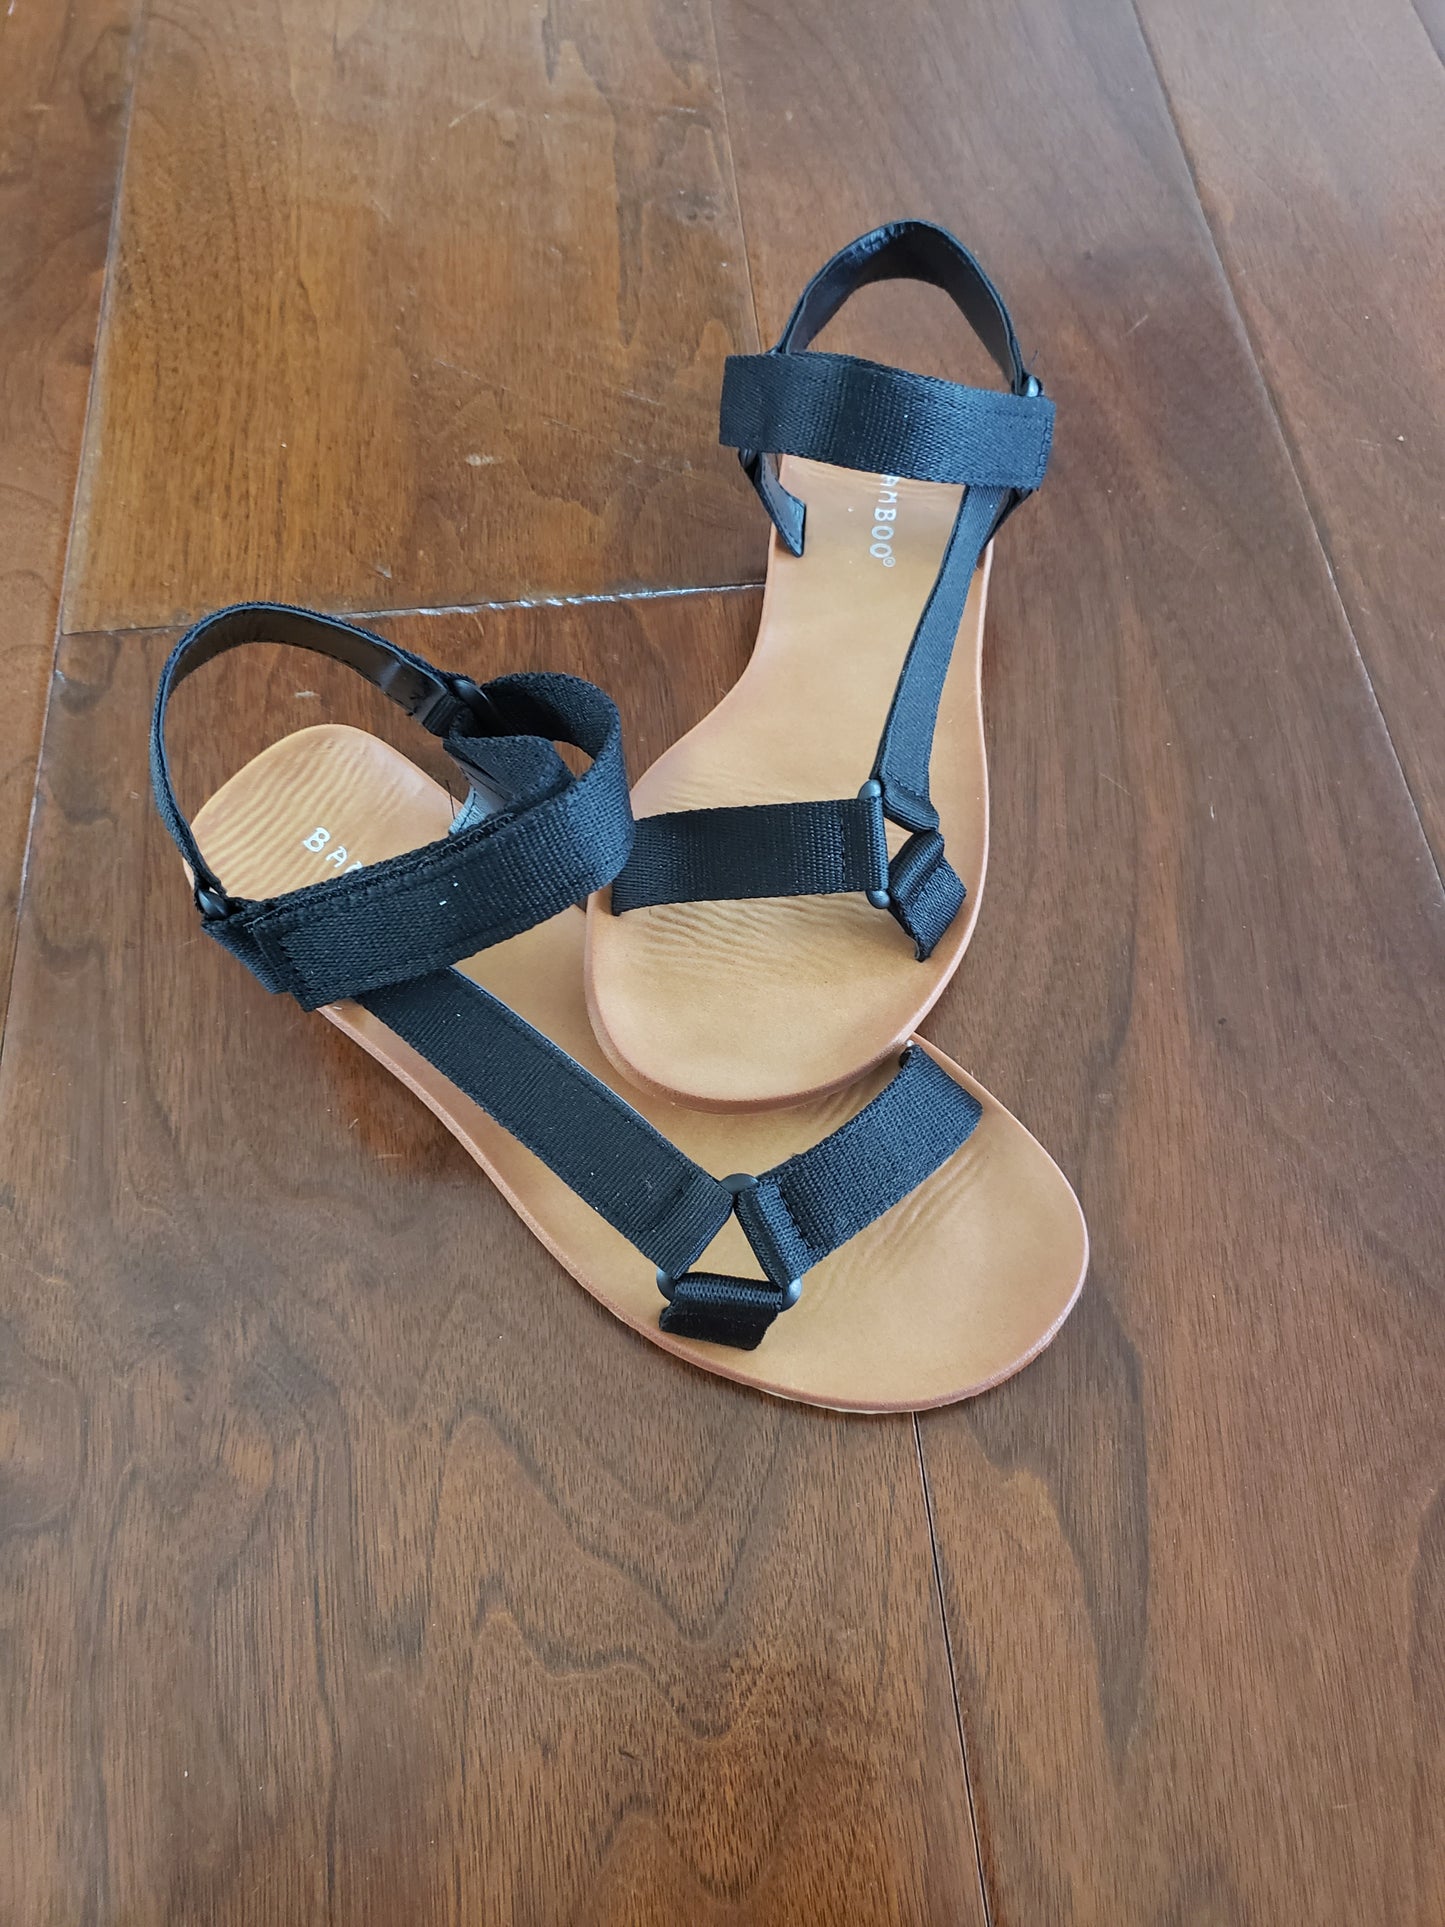 Molly Sandals